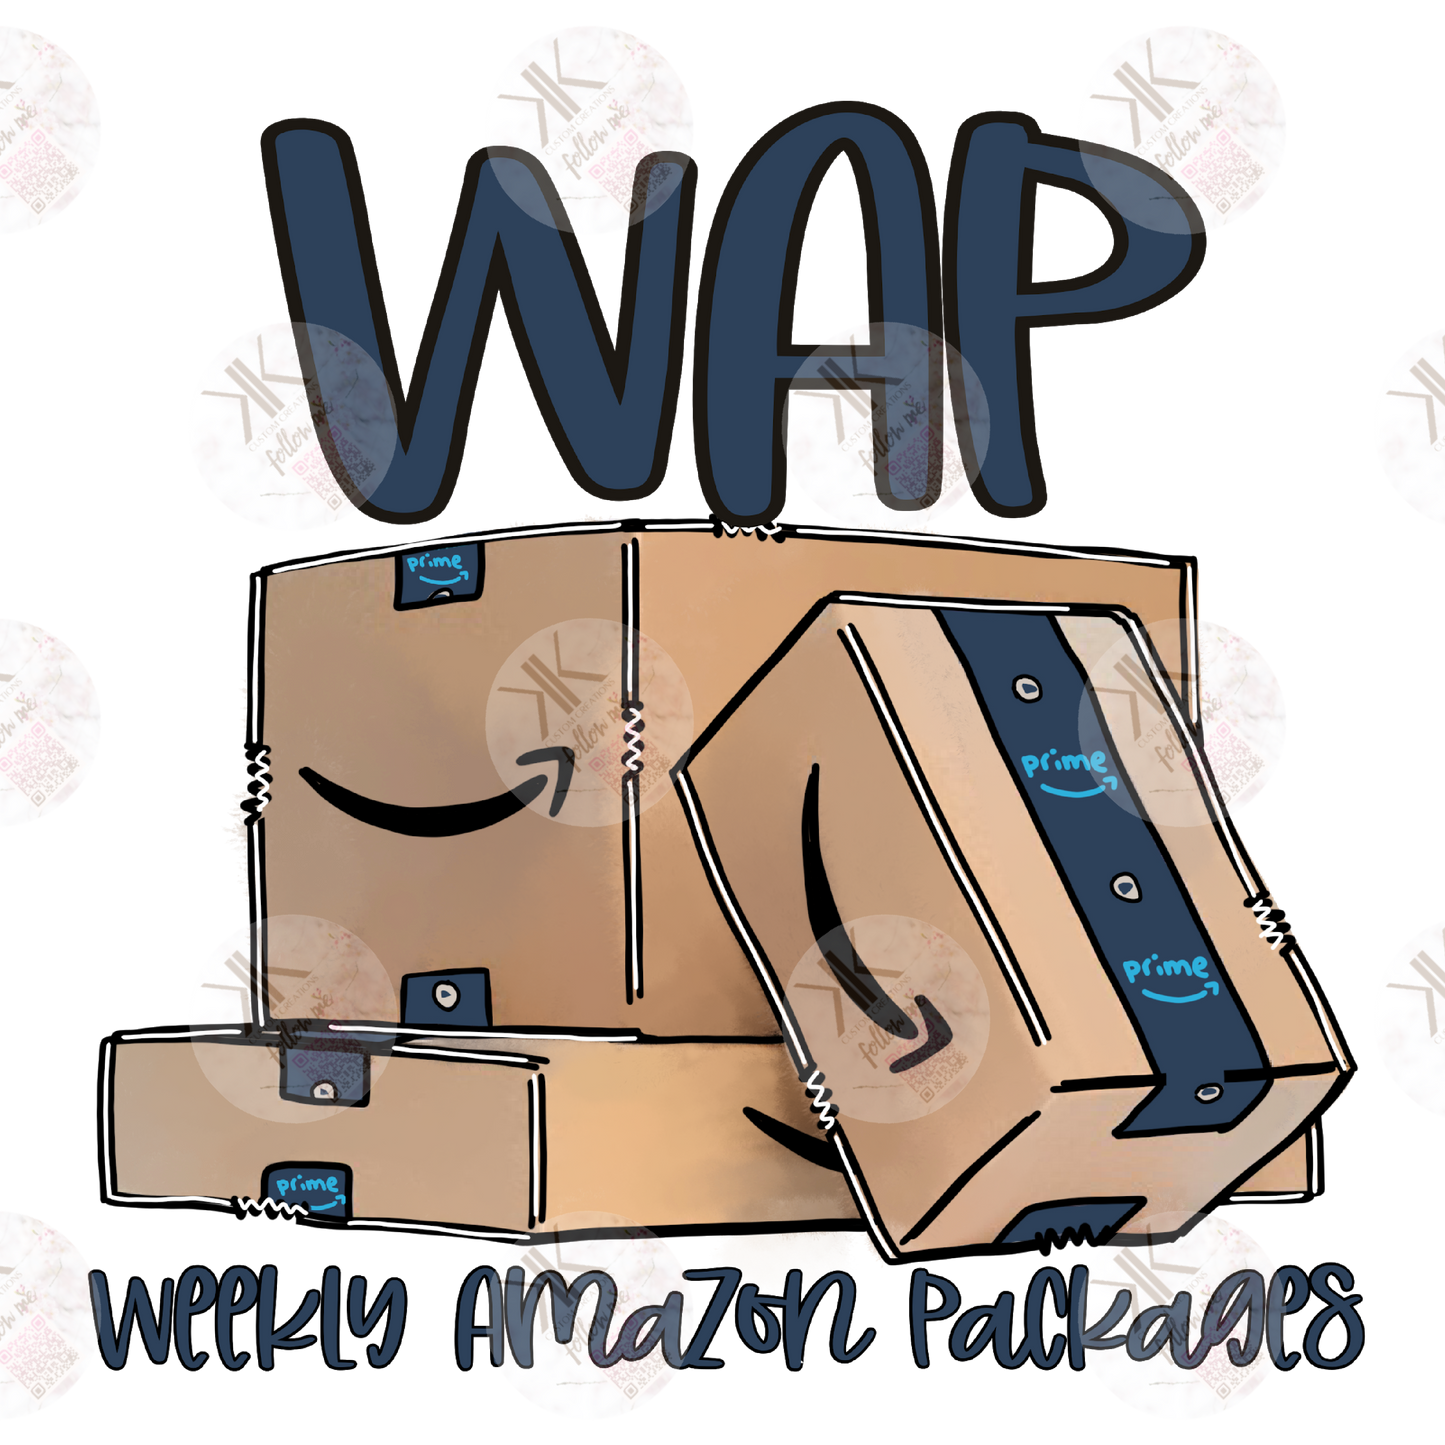 WAP Weekly Amazon Packages PRINT ONLY